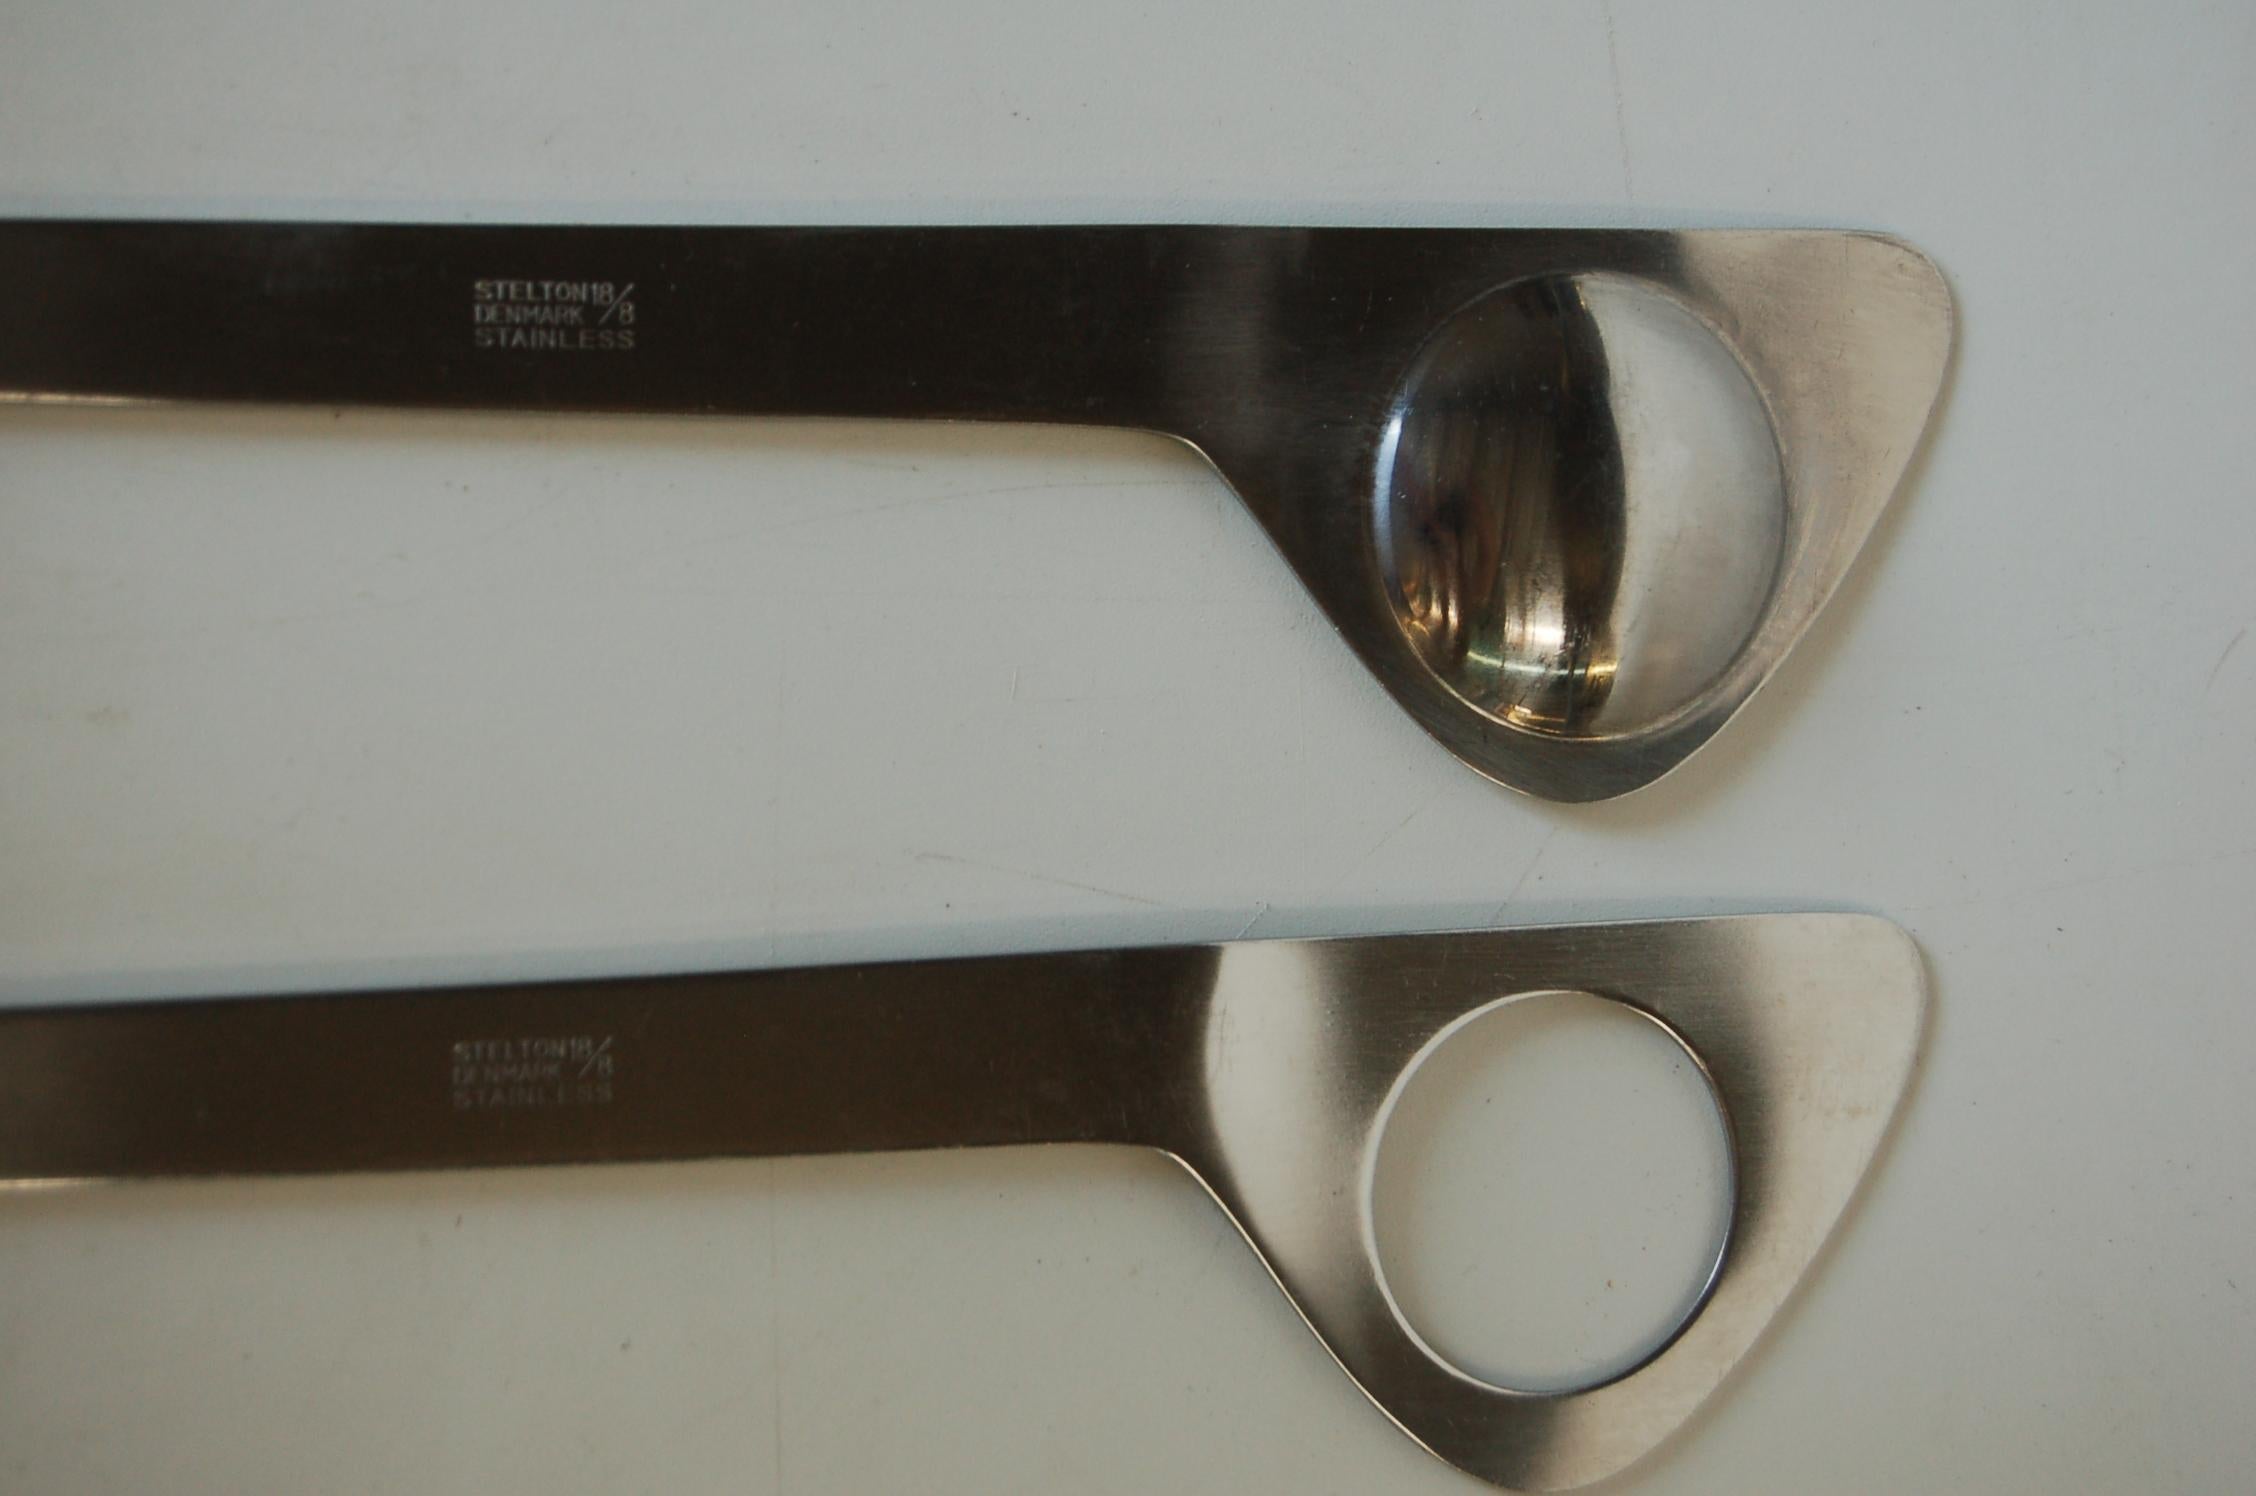 Midcentury Stainless Salad Serving Utensils Set Stelton Line by Arne Jacobsen In Excellent Condition For Sale In Van Nuys, CA